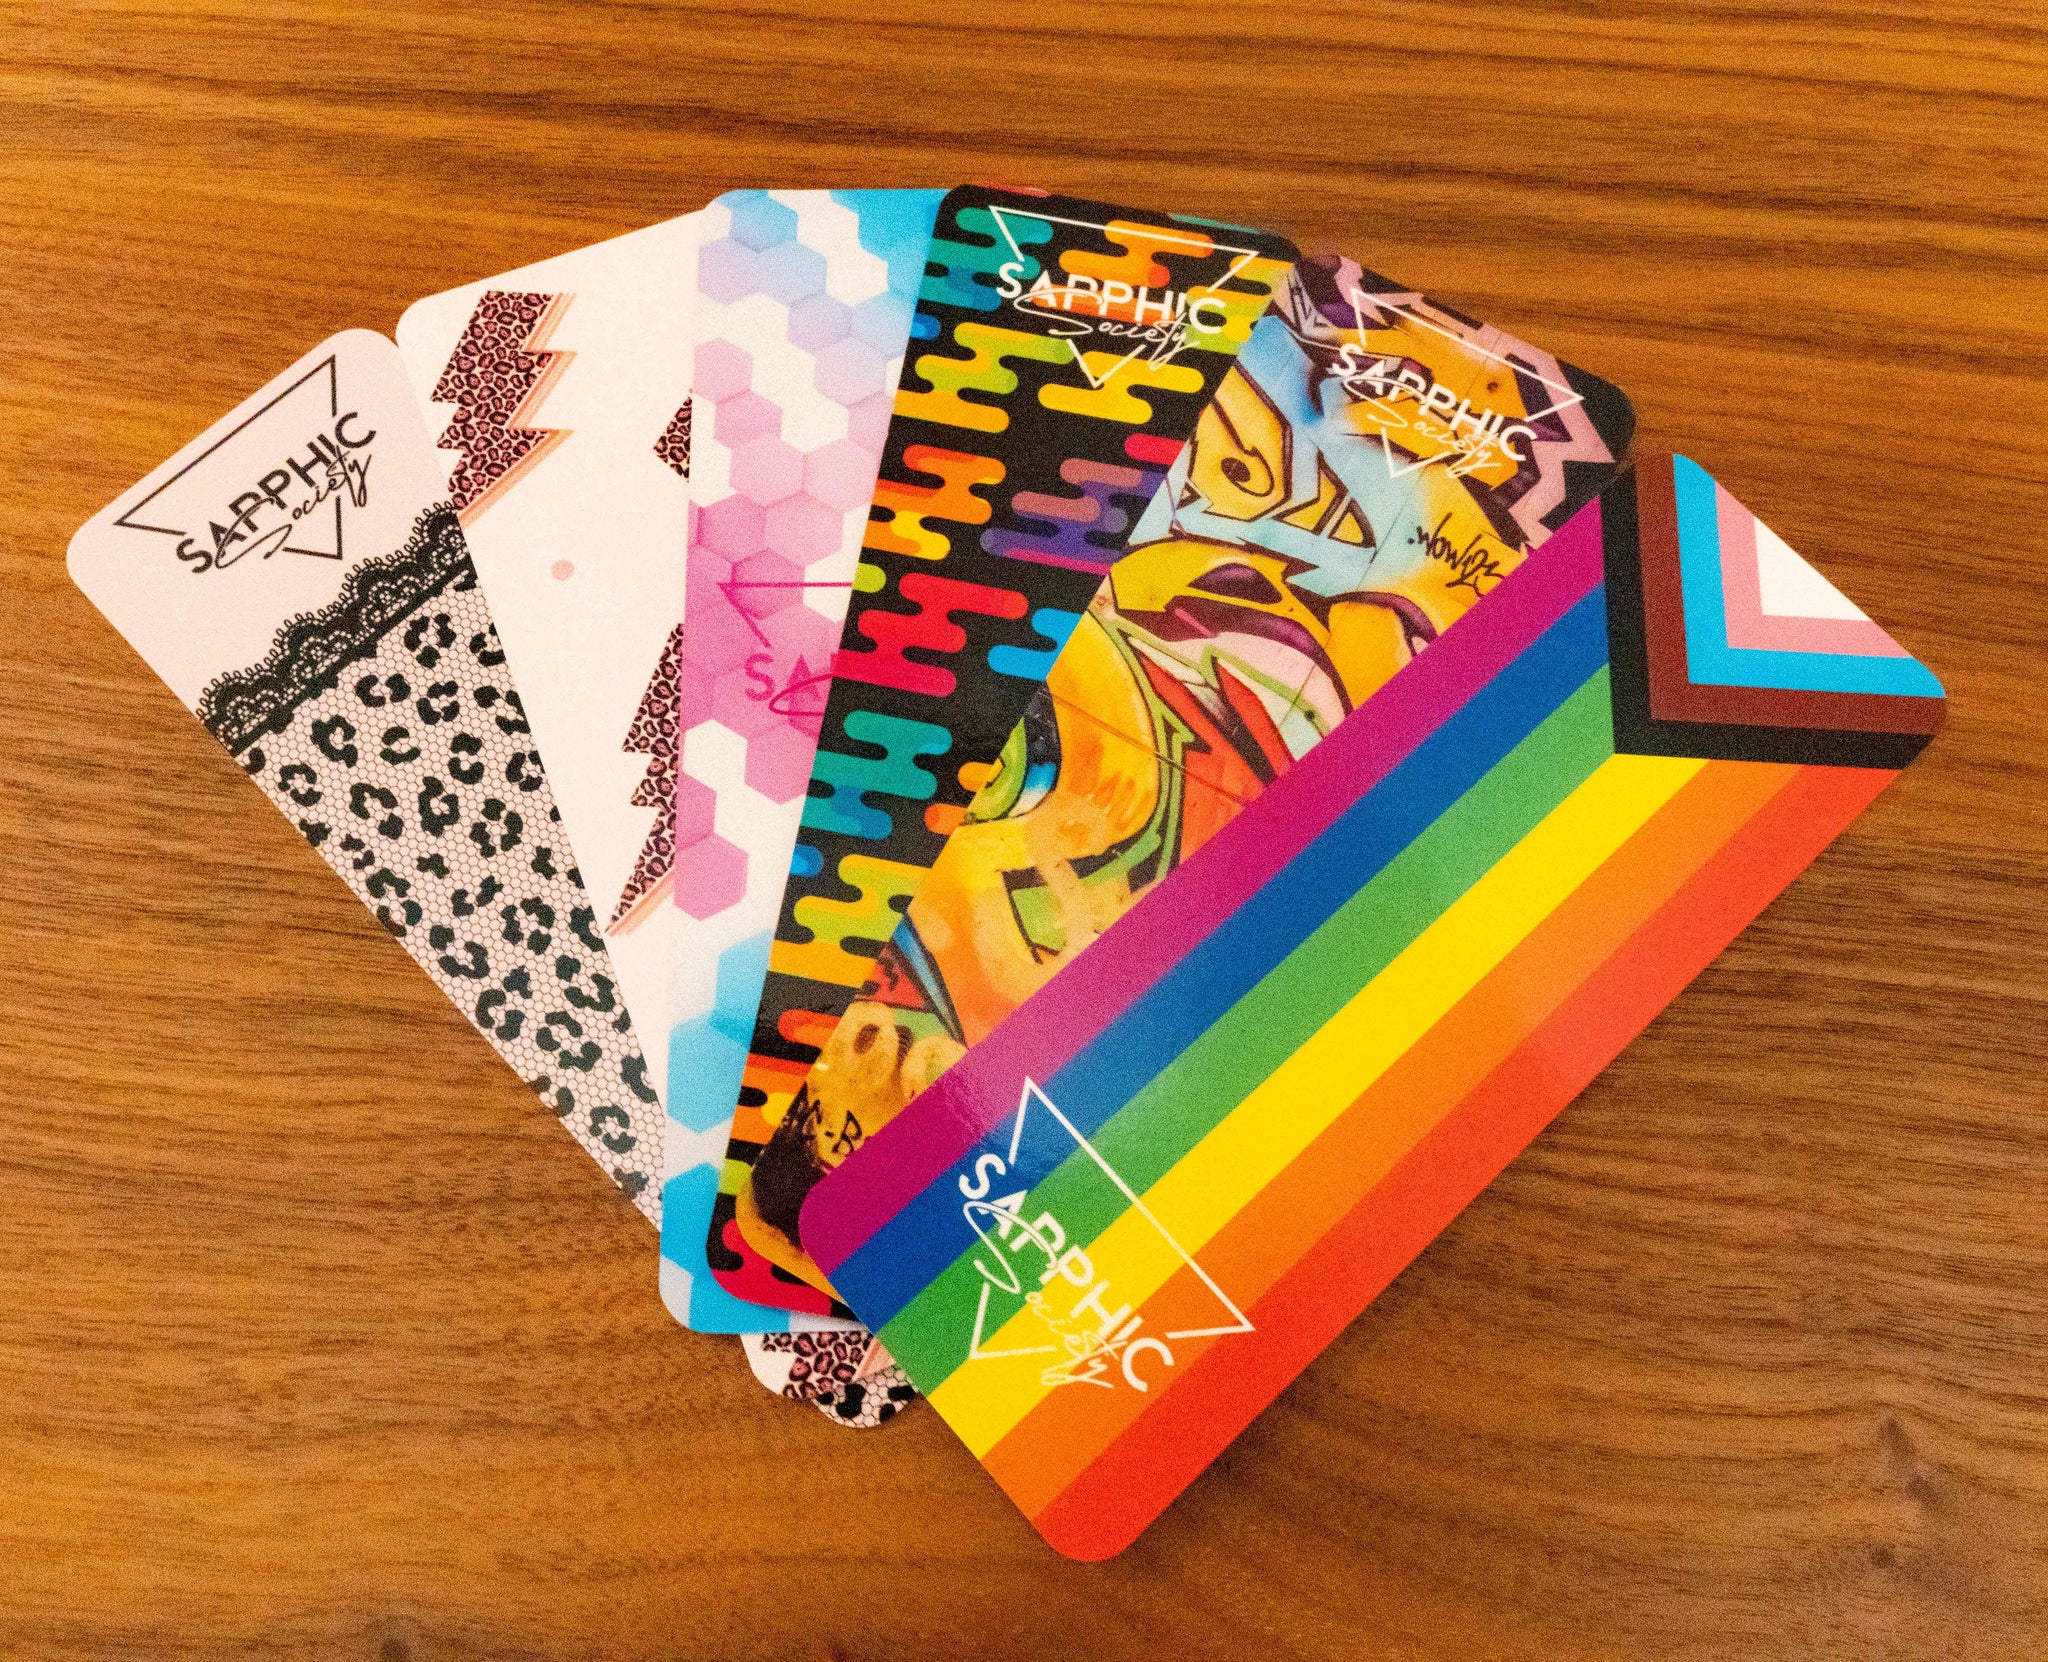 Bookmarks (6 Pack) - Sapphic Society